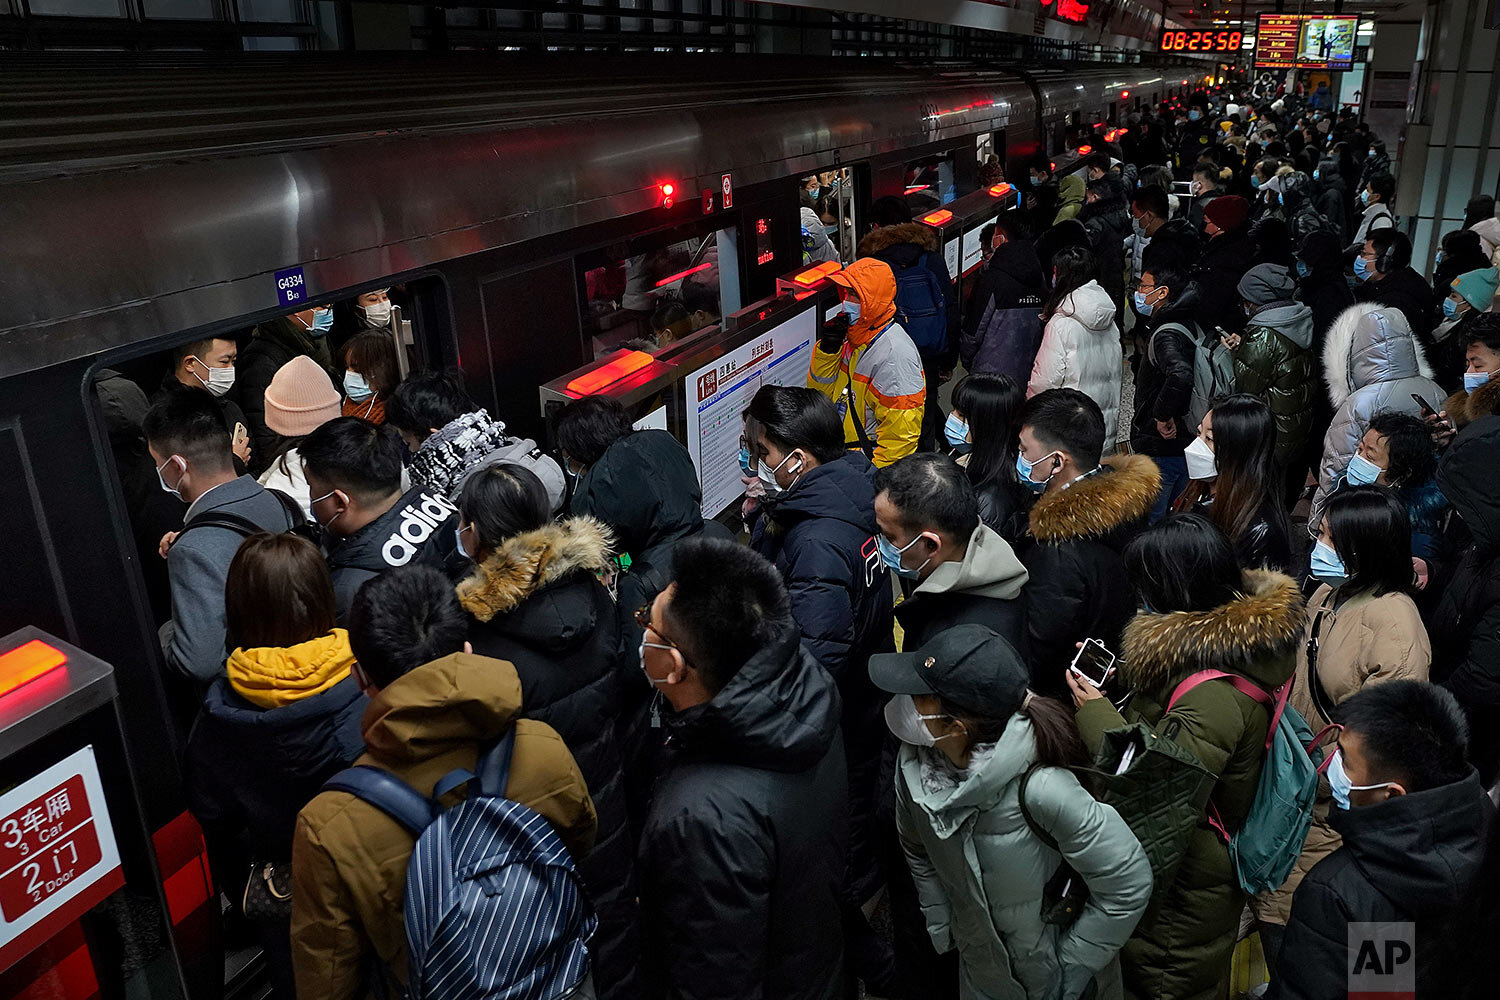  Commuters wearing face masks to help curb the spread of the coronavirus rush into a train carriage during a morning rush hour at a subway station in Beijing, Tuesday, Jan. 5, 2021.  (AP Photo/Andy Wong) 